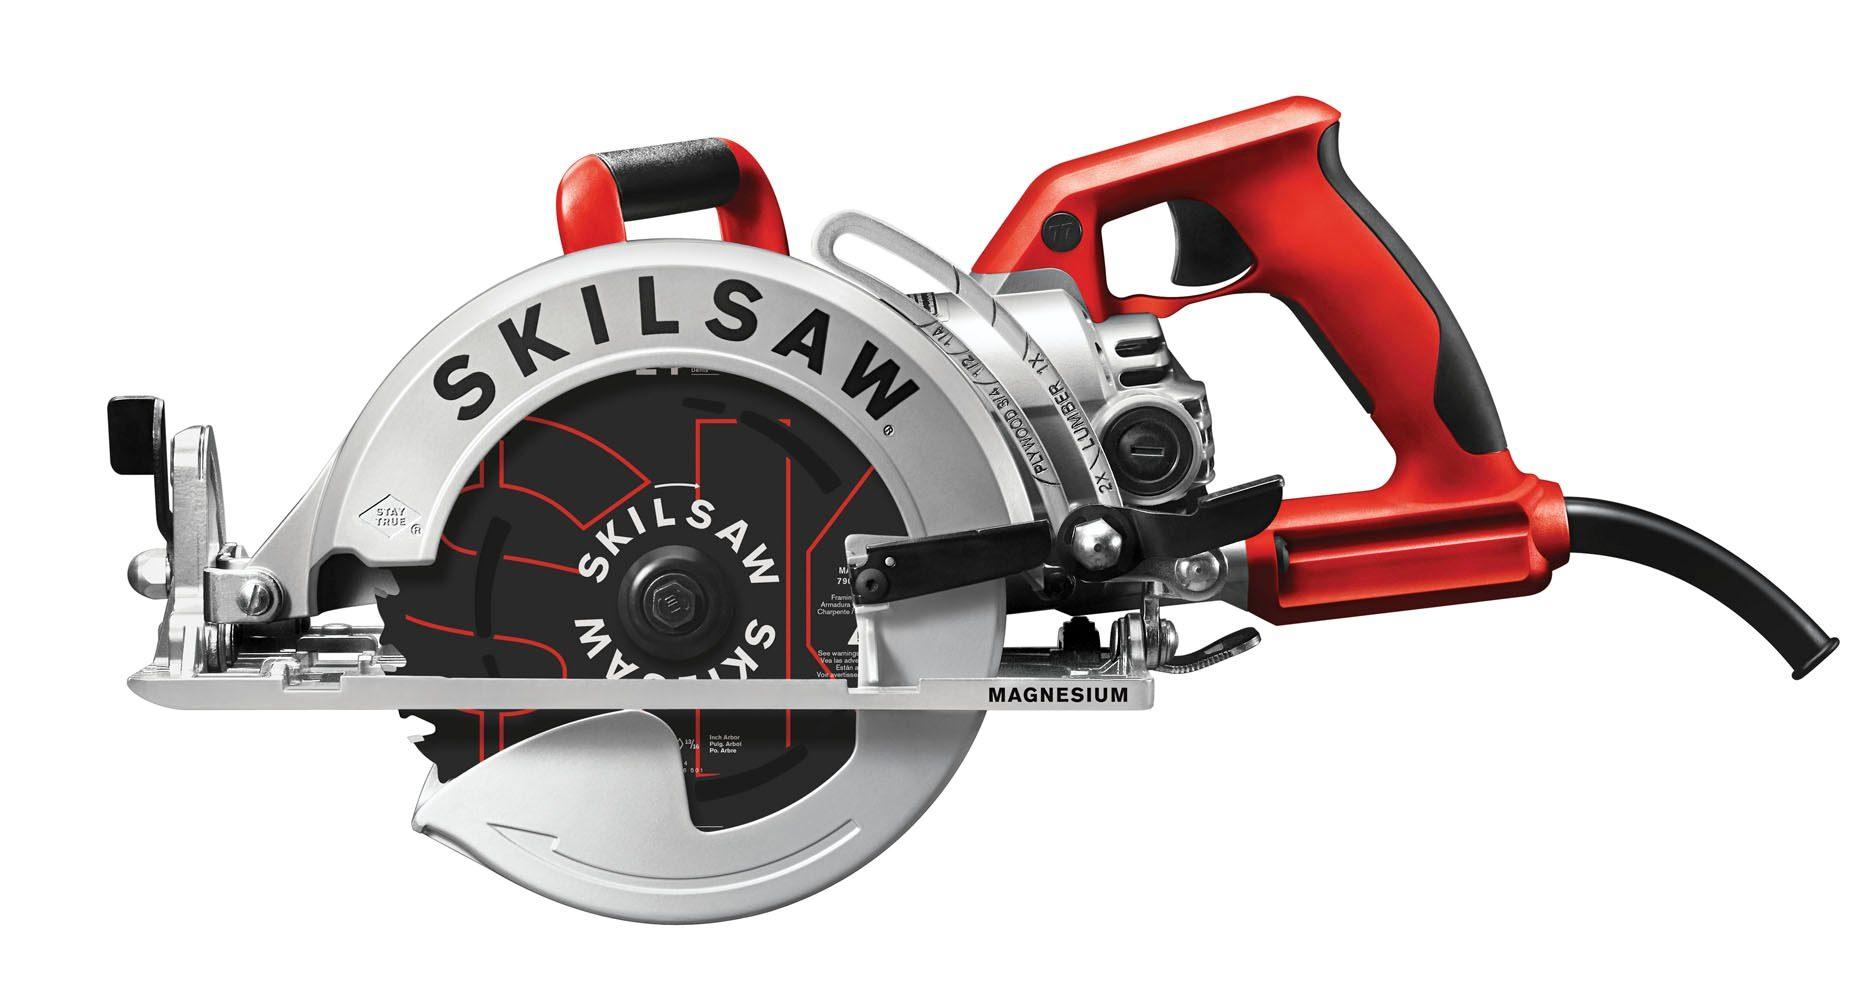 SKILSAW 15-Amp 7-1/4-Inch Lightweight Worm Drive Circular Saw with SKILSAW Blade, Corded, SPT77WML-01